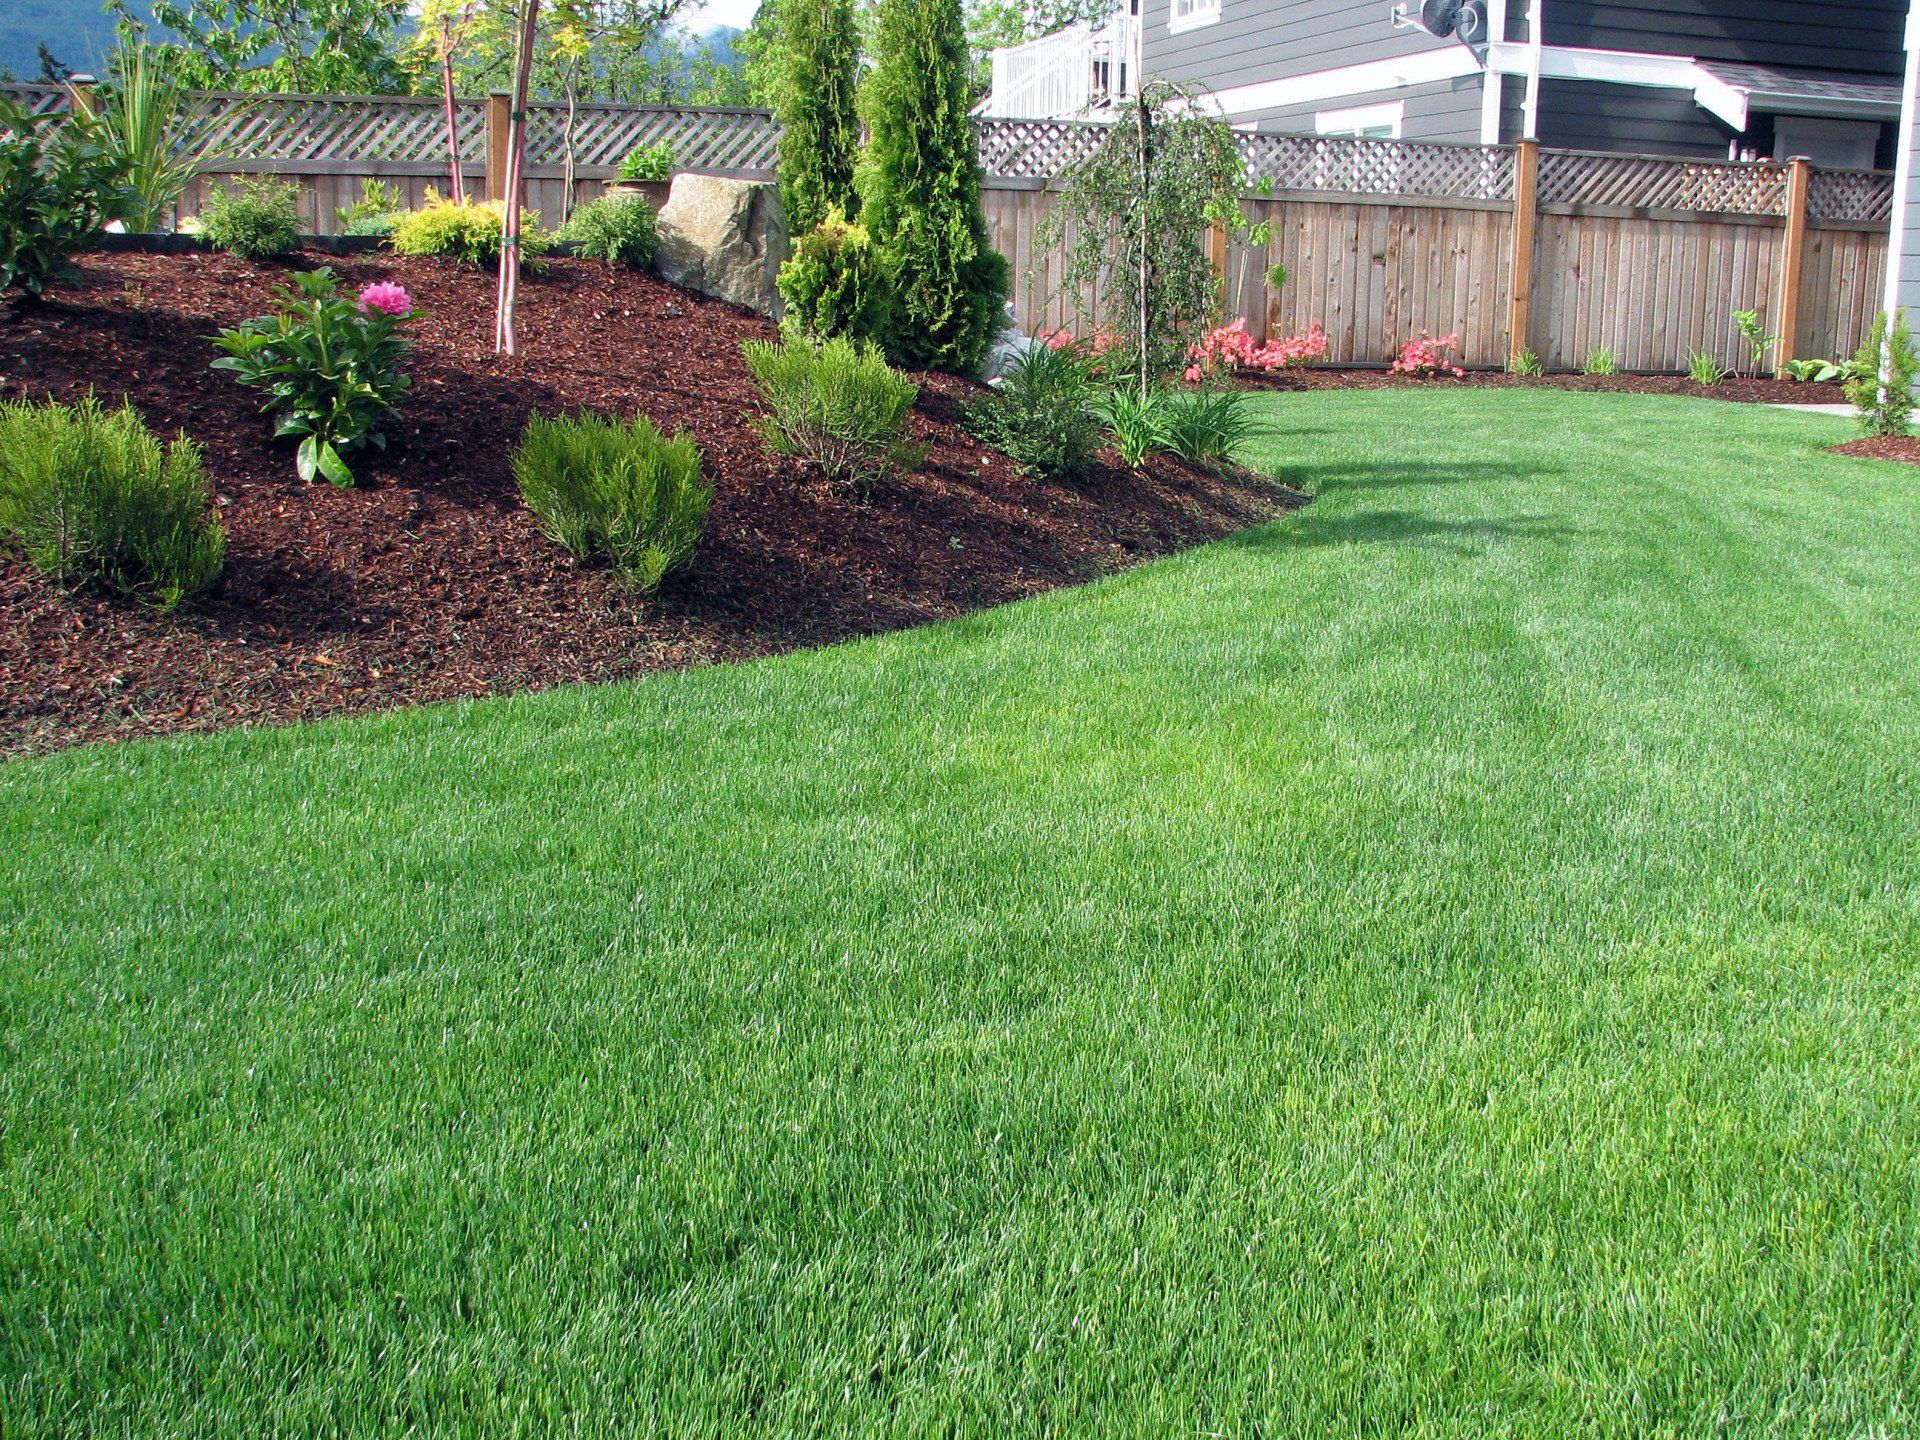 lawn irrigation services